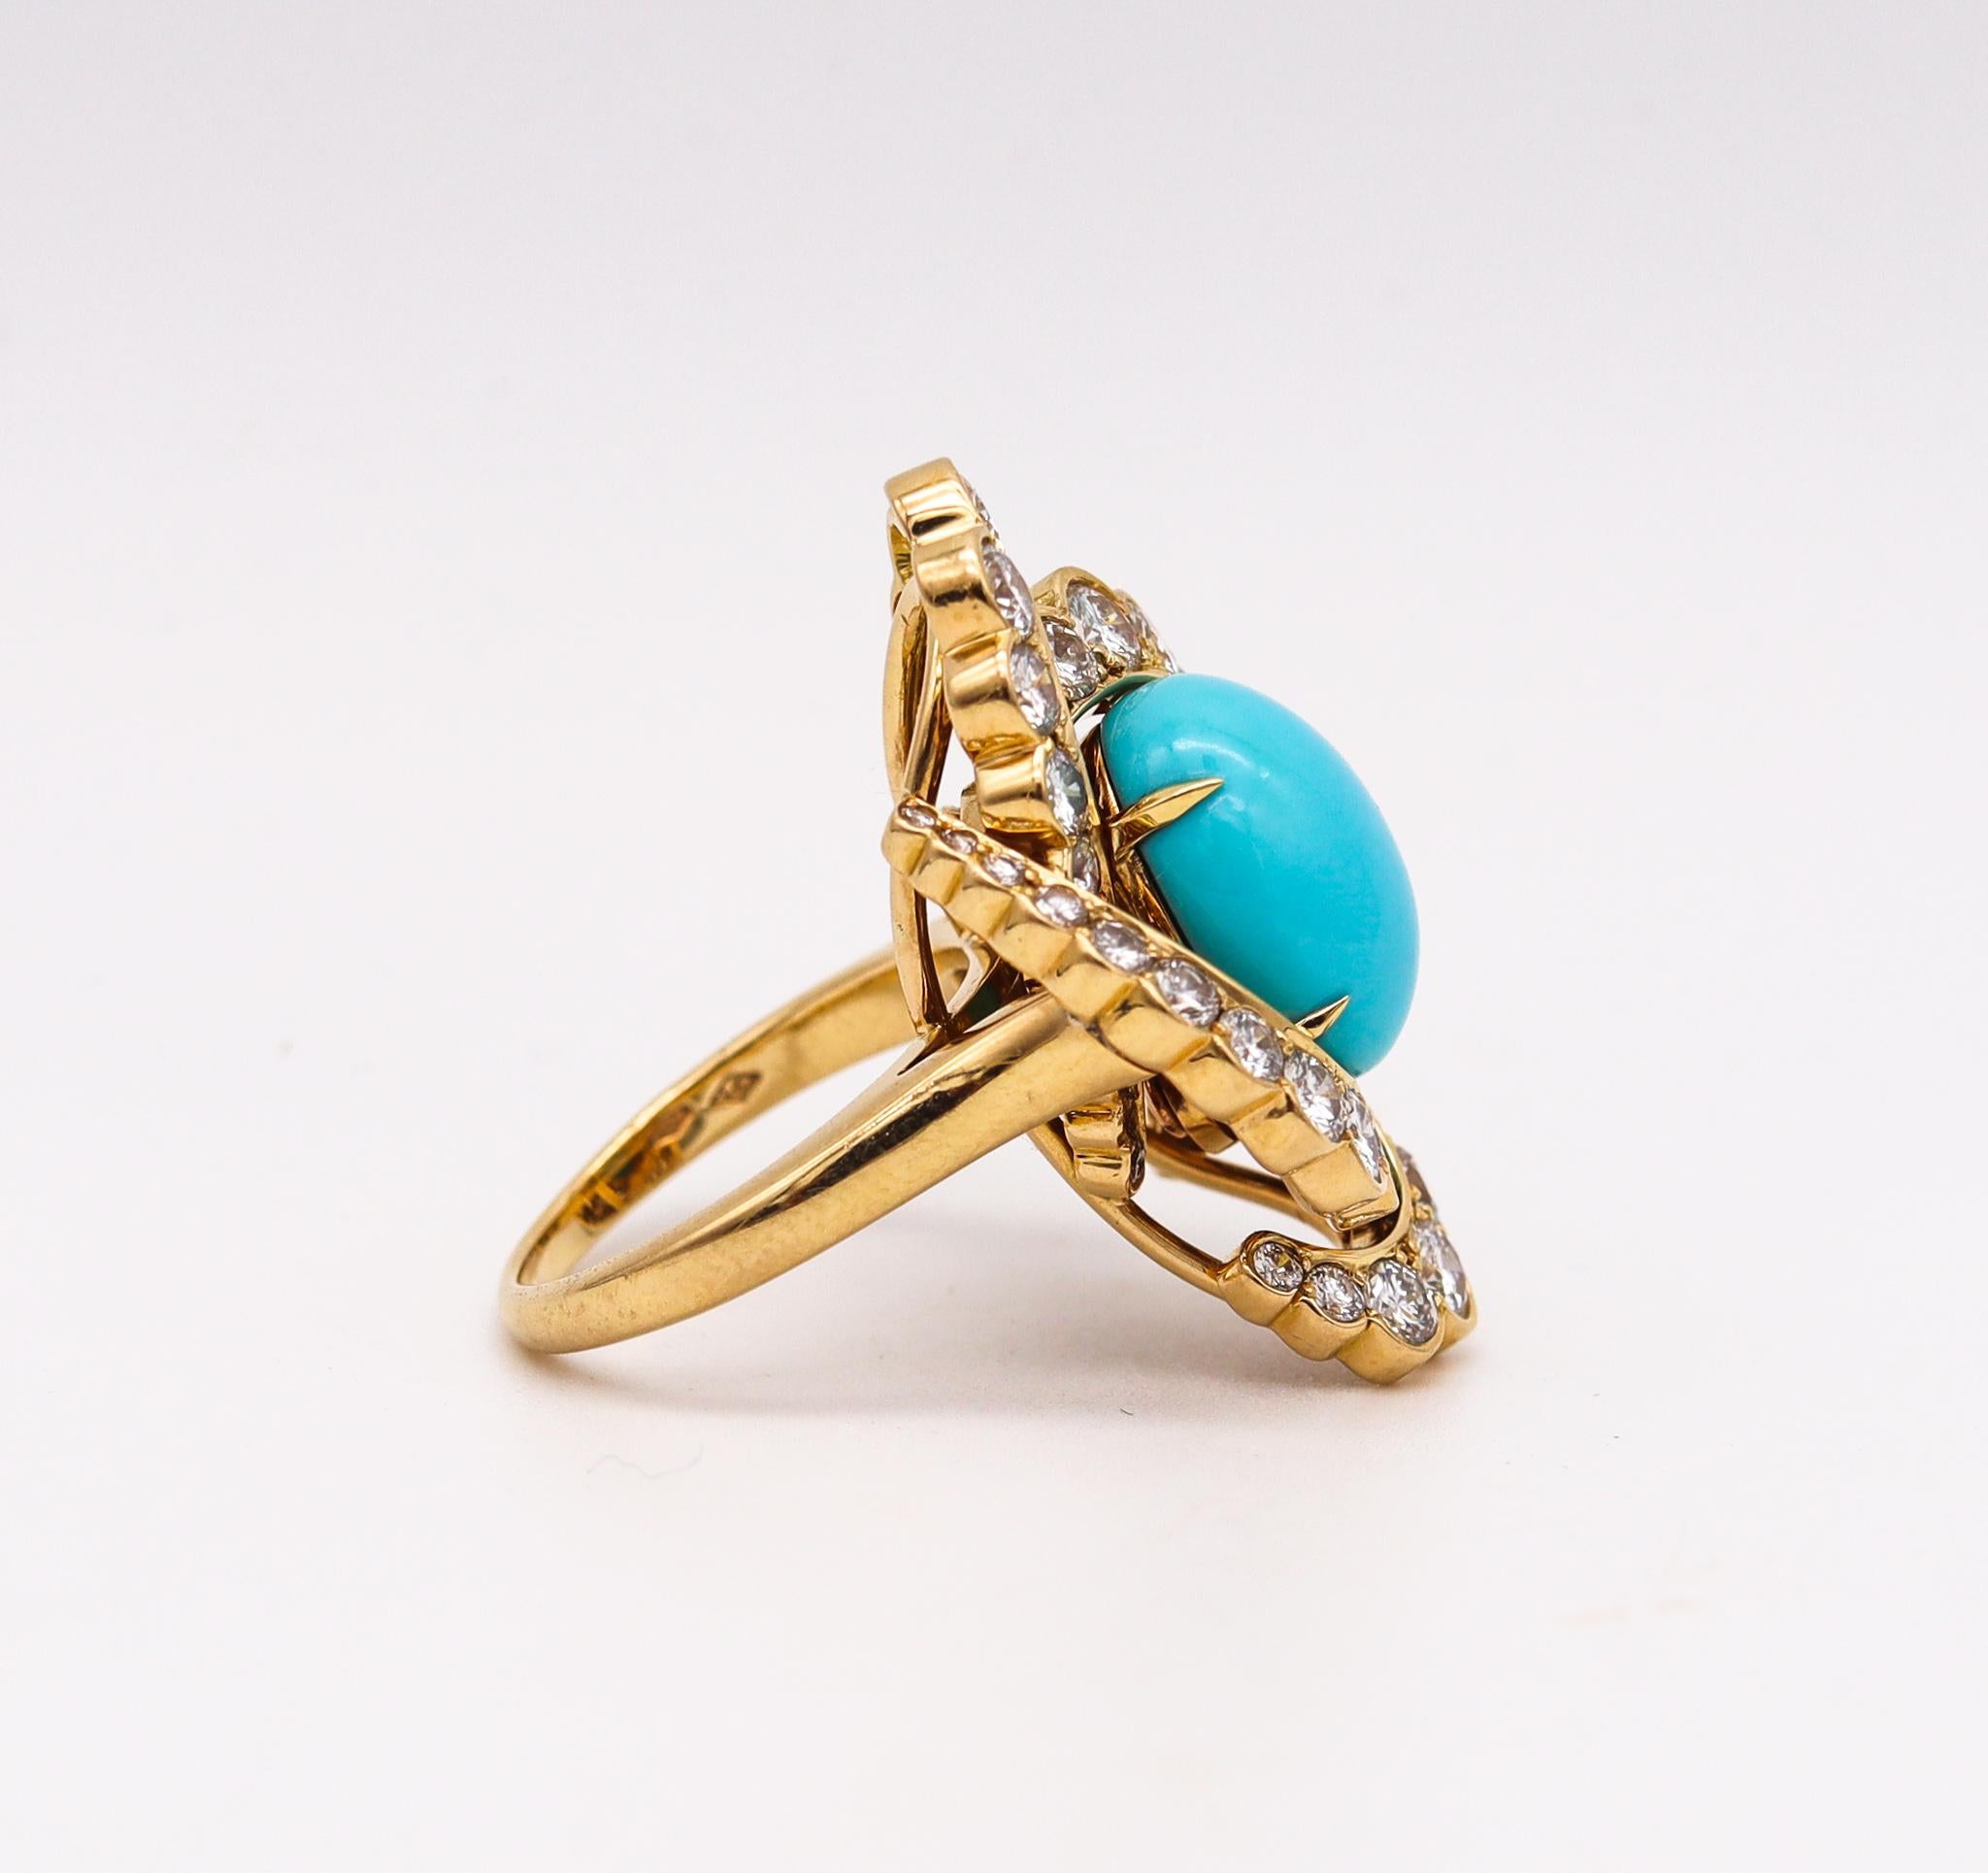 Modernist Fred Paris Gem Set Cocktail Ring 18Kt Yellow Gold 12.34 Ctw Diamonds & Turquoise For Sale